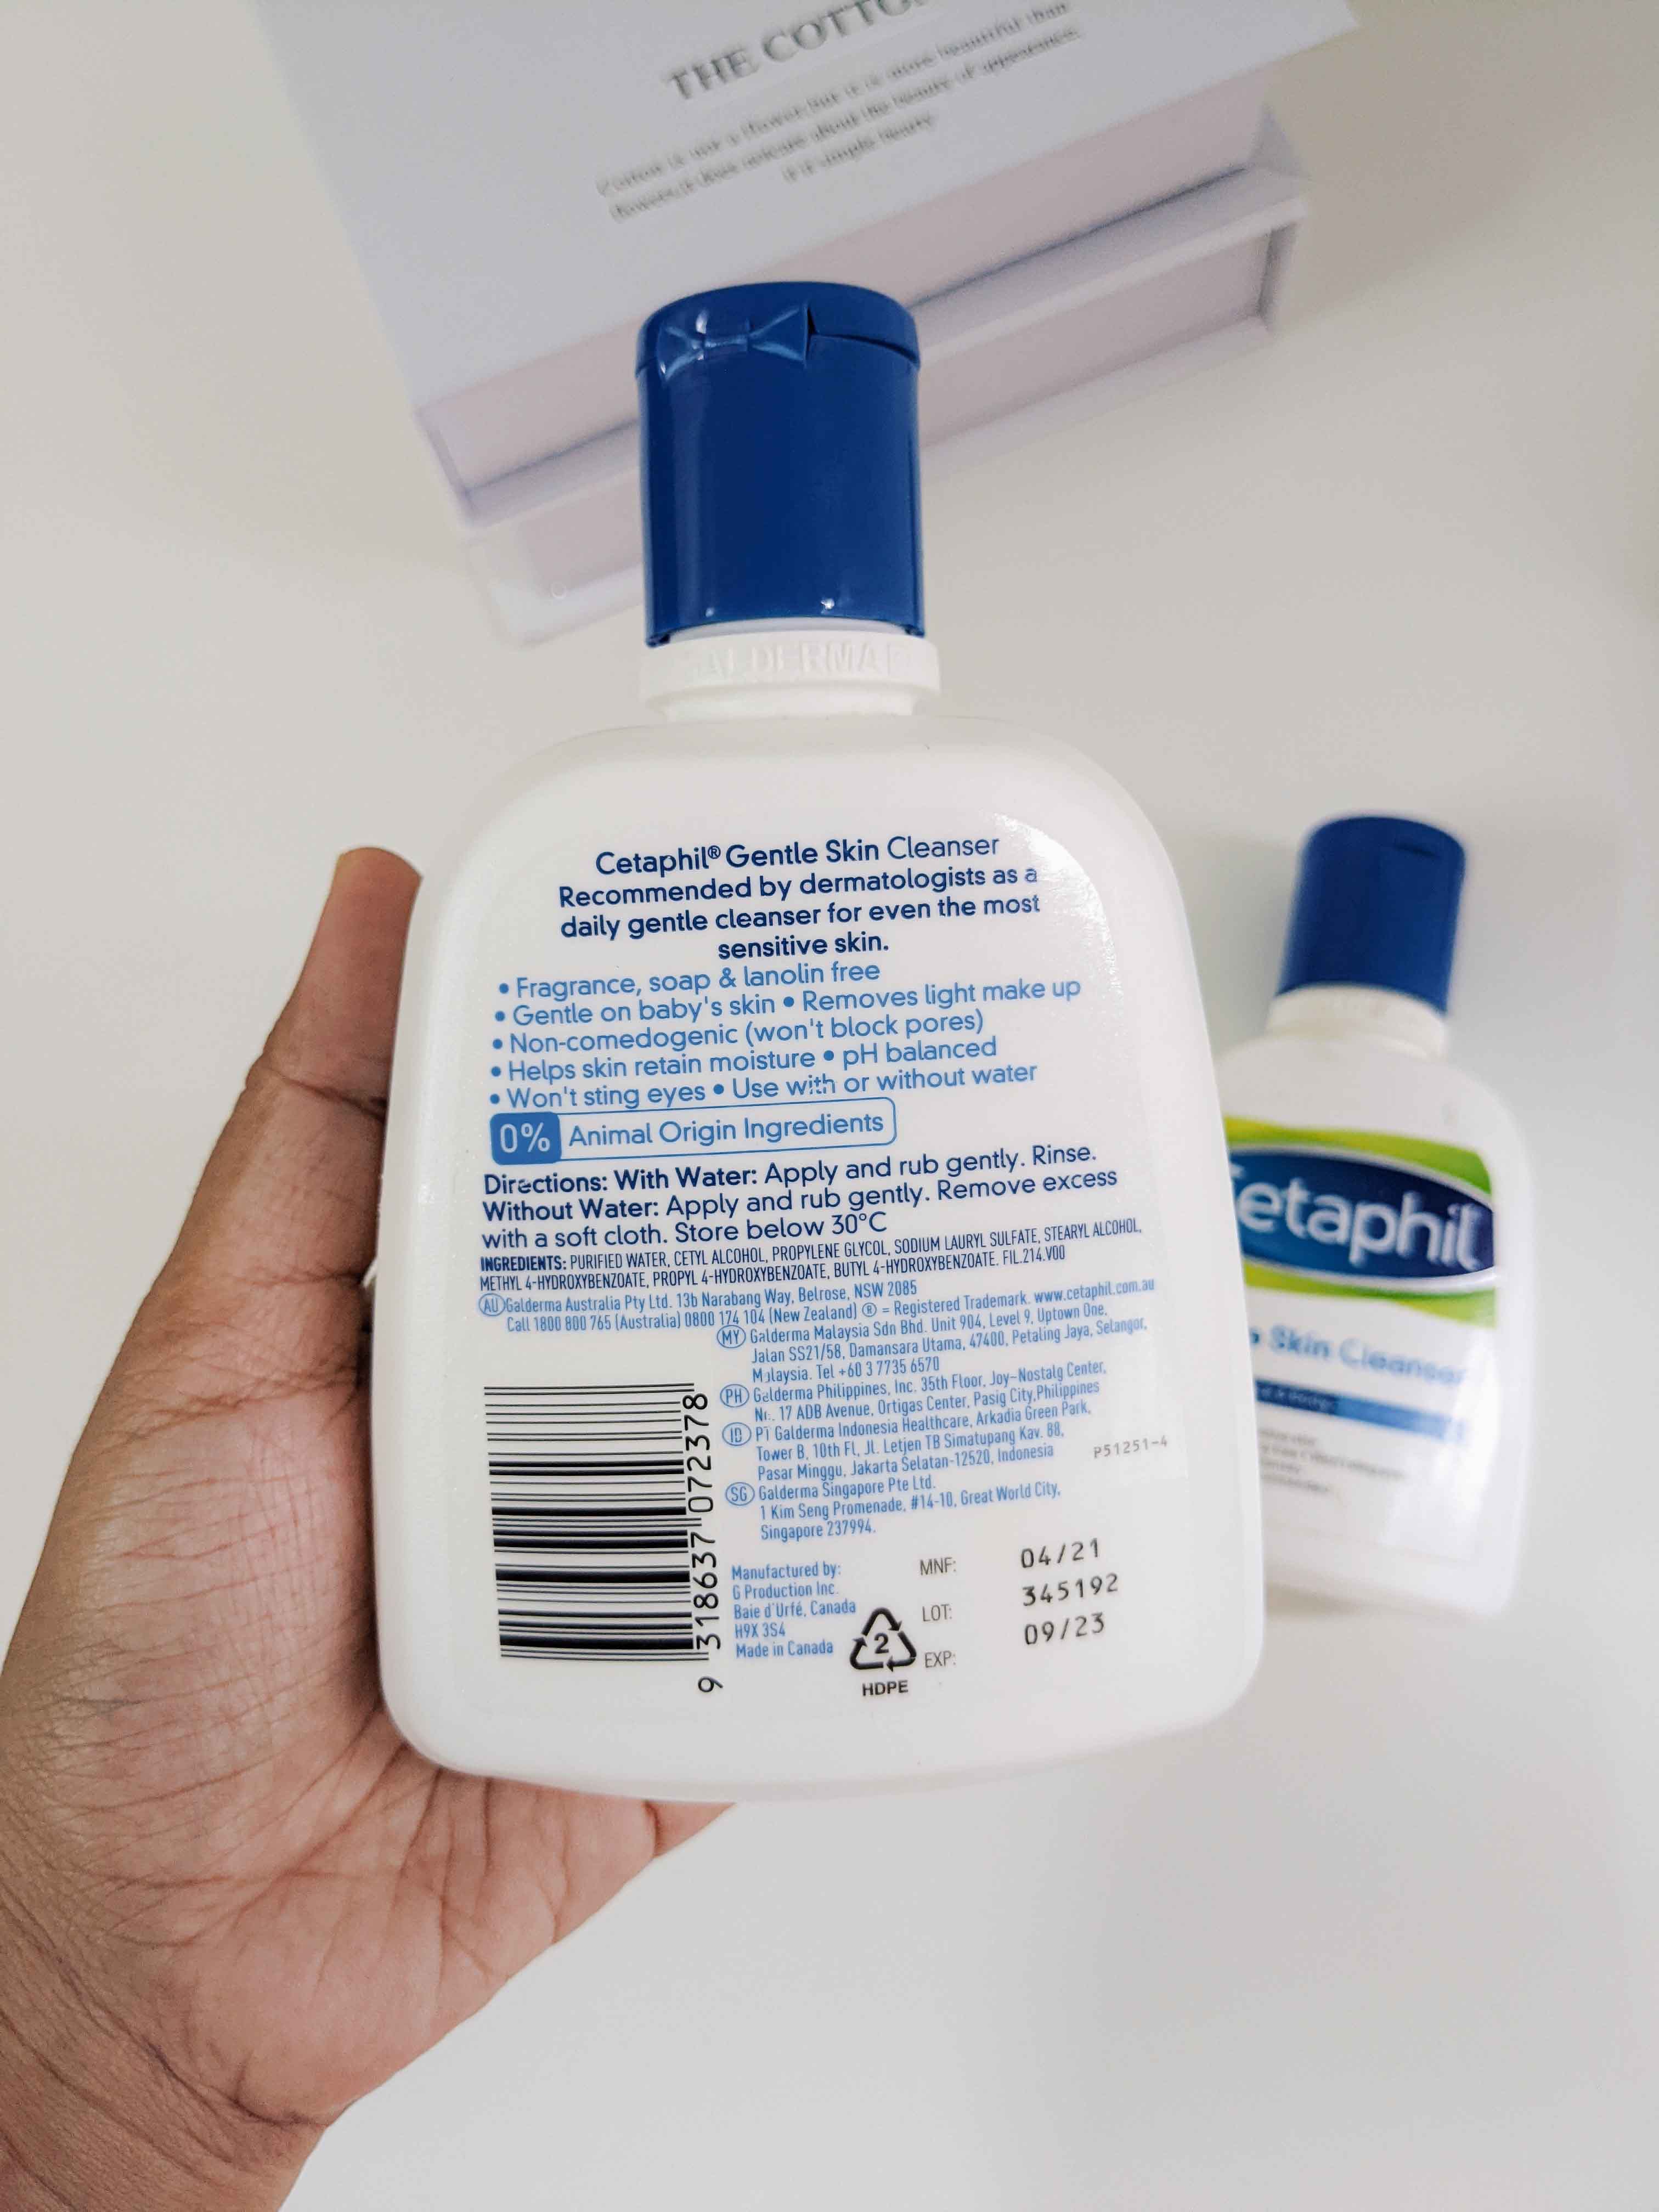 My New Skincare : Cetaphil Gentle Skin Cleanser